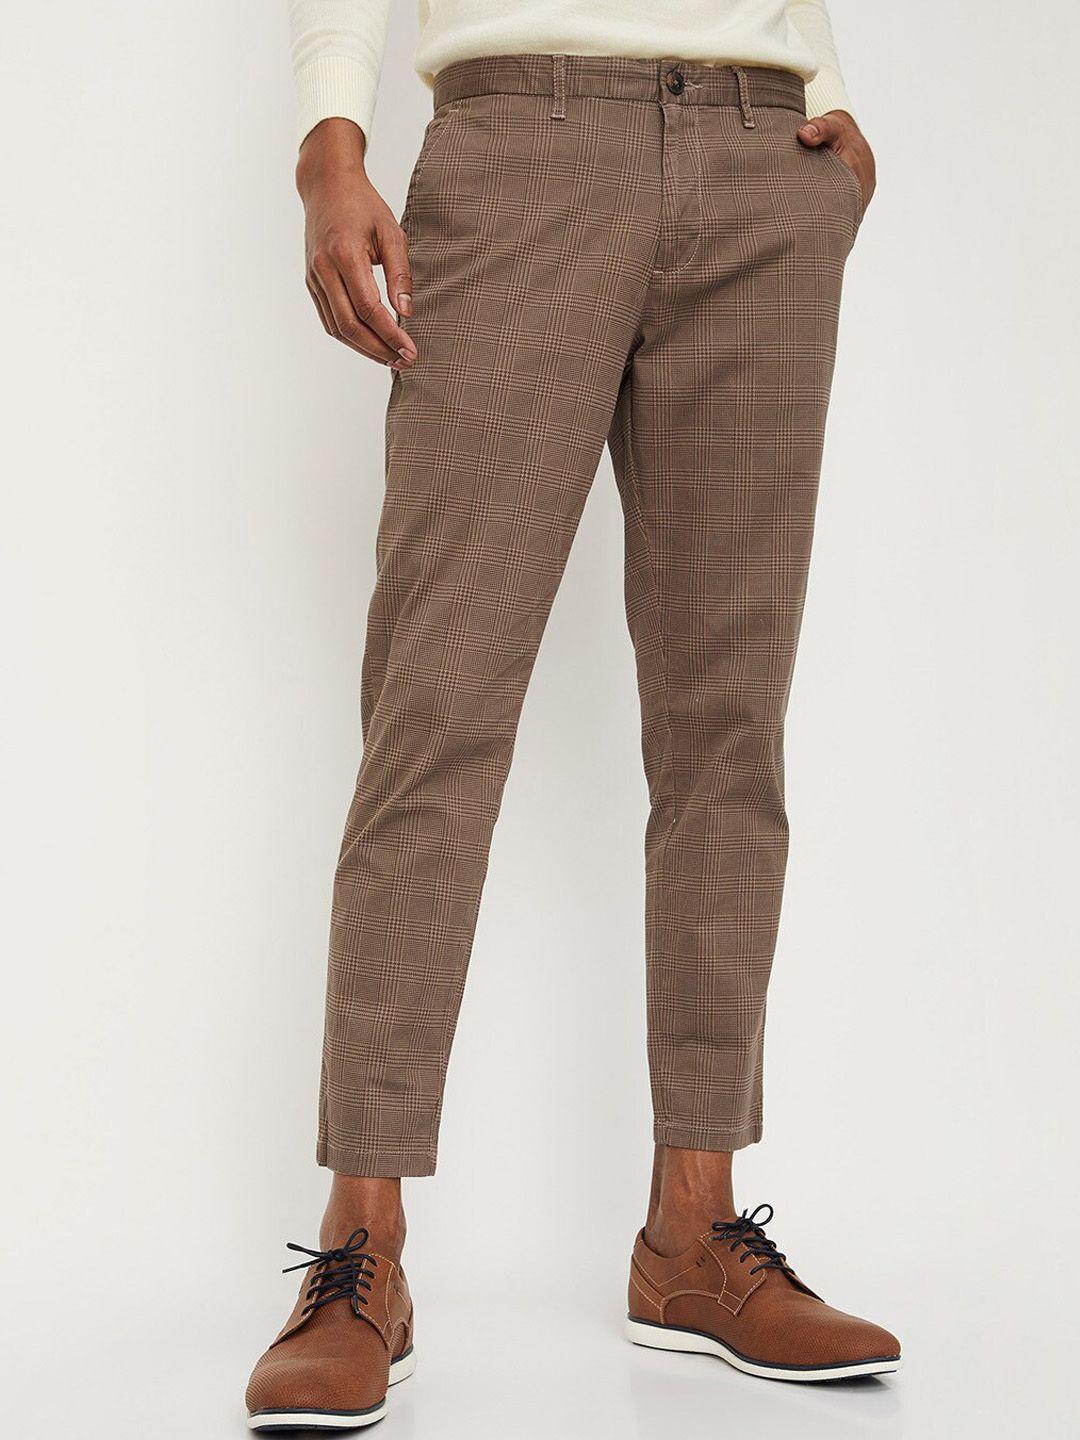 max-men-cotton-printed-trousers